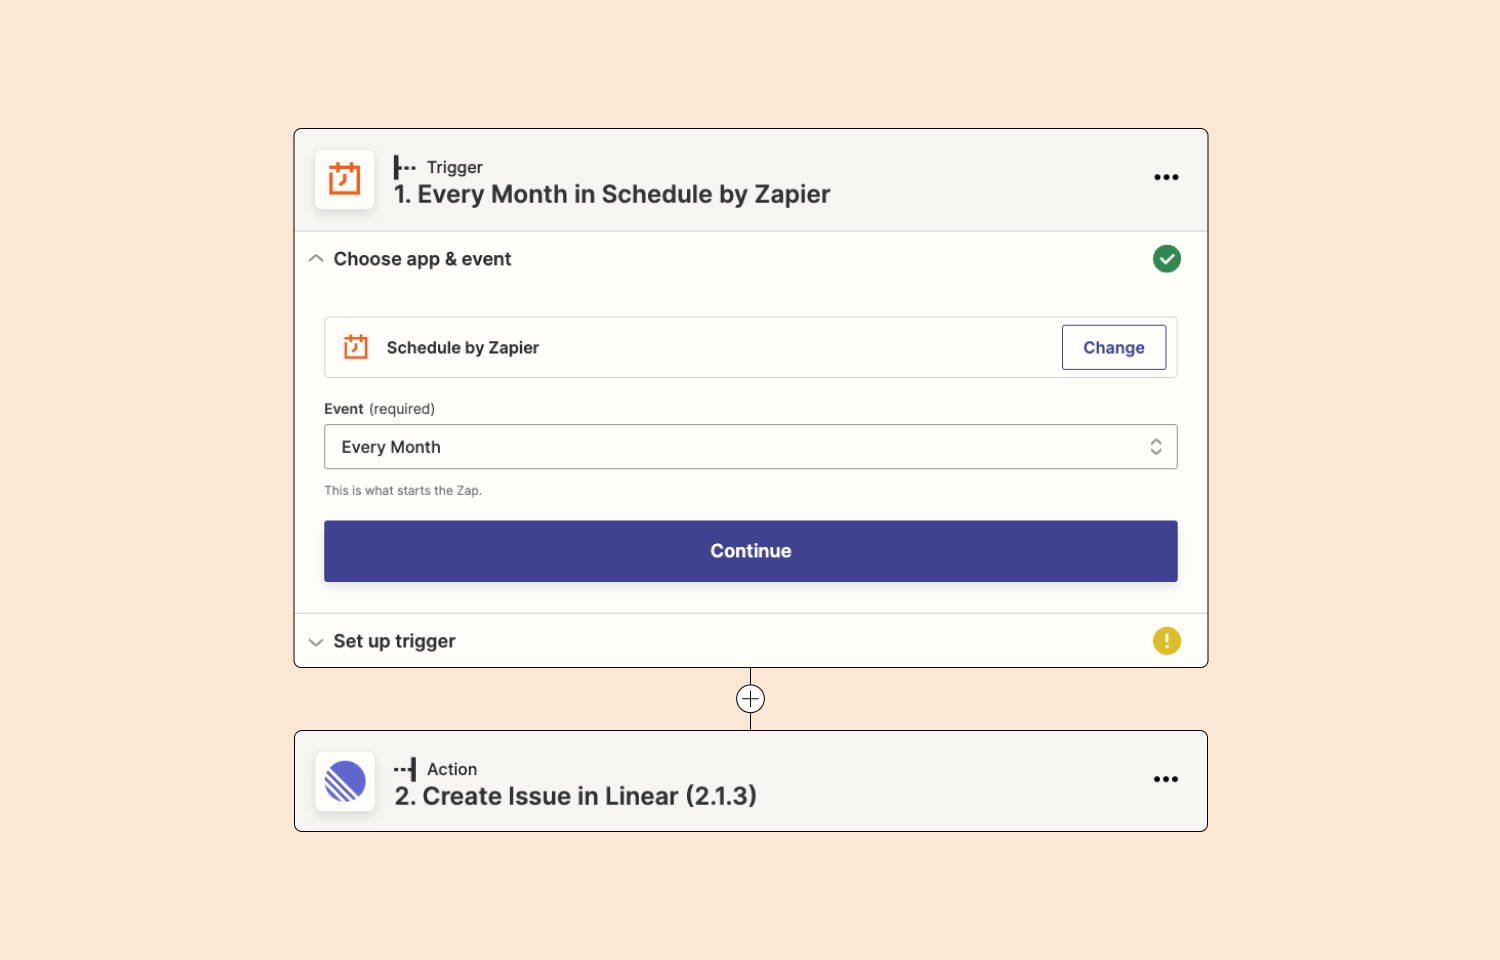 Connecting Zapier's "Every month in Schedule" trigger to create a Linear issue